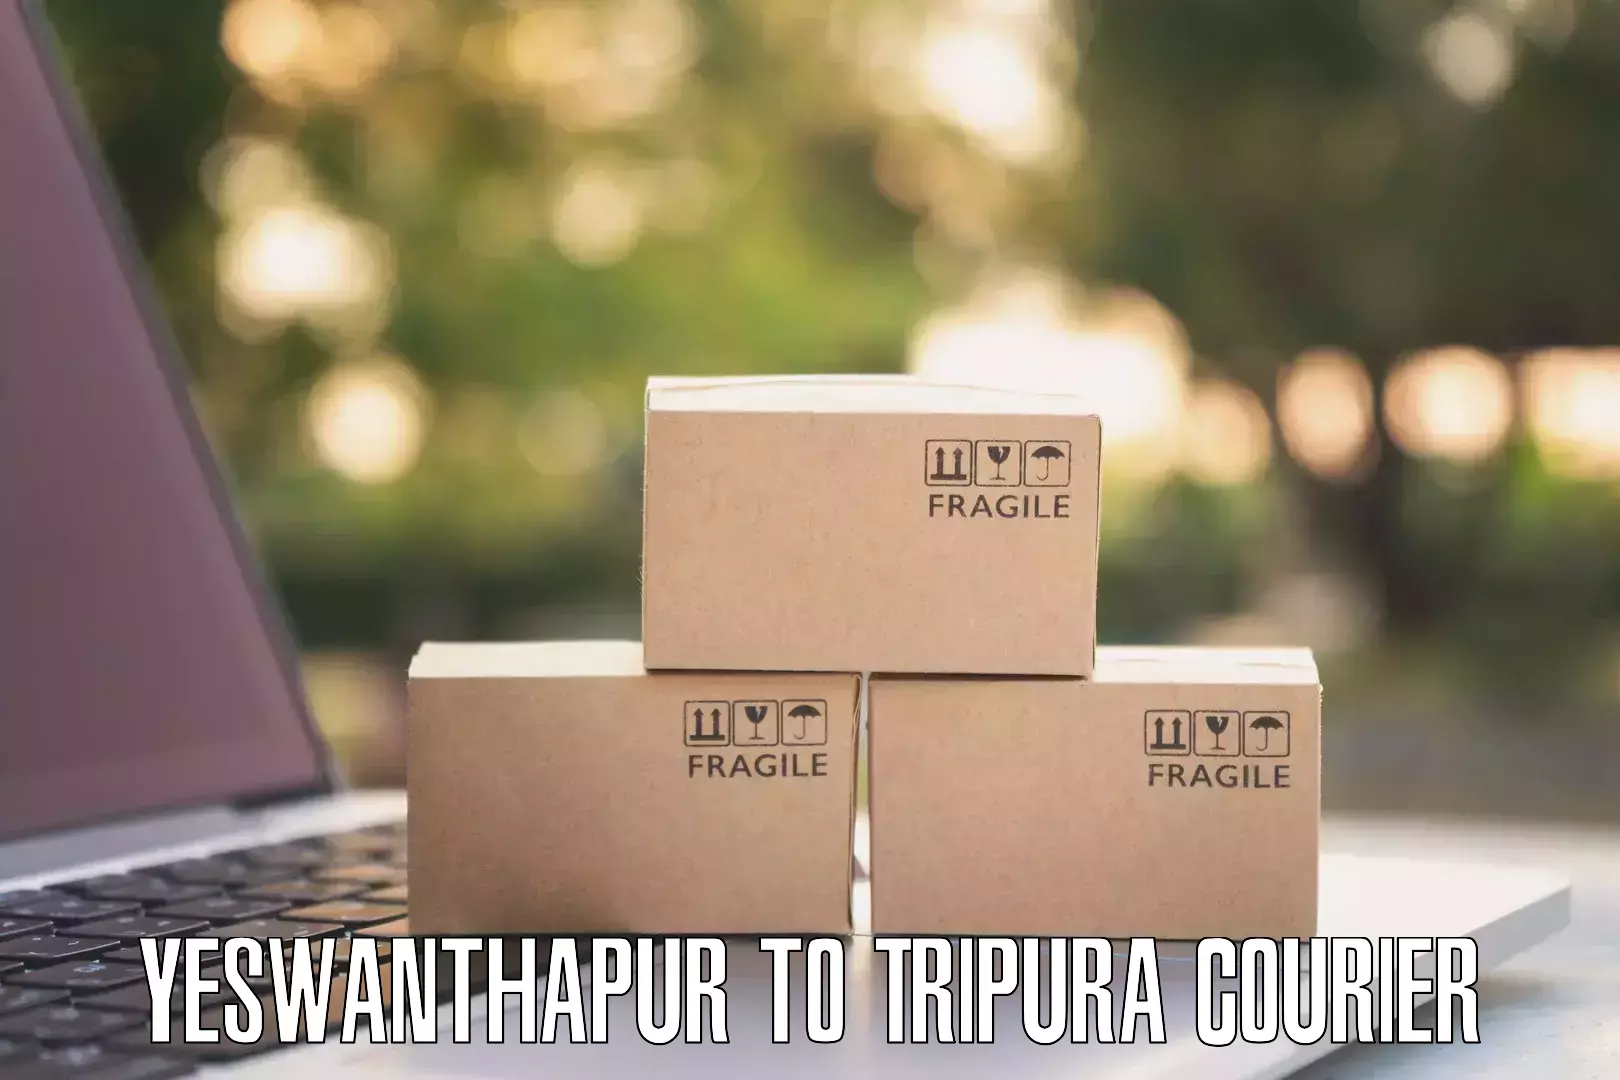 State-of-the-art courier technology Yeswanthapur to West Tripura